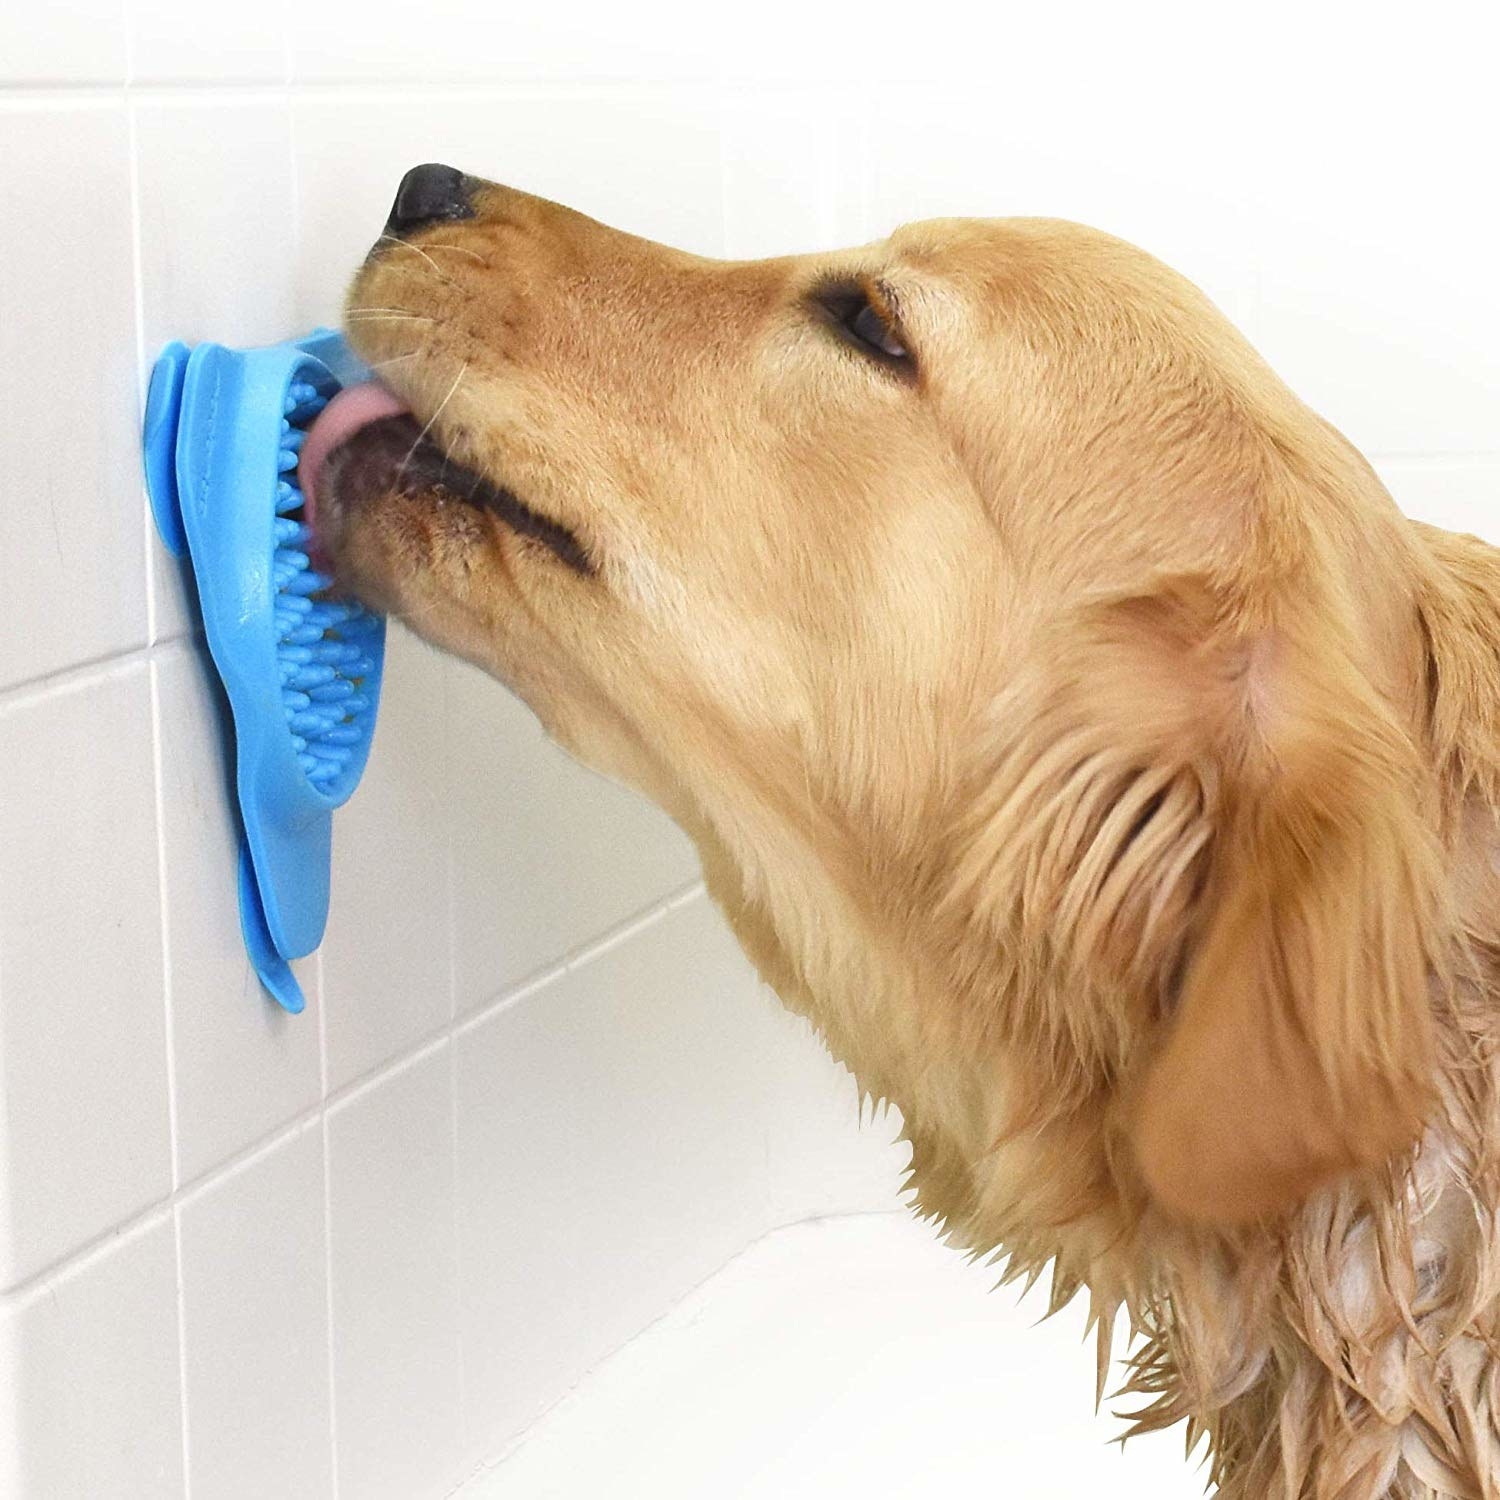 The blue slow treater stuck on the bathtub wall with a golden retriever licks it 